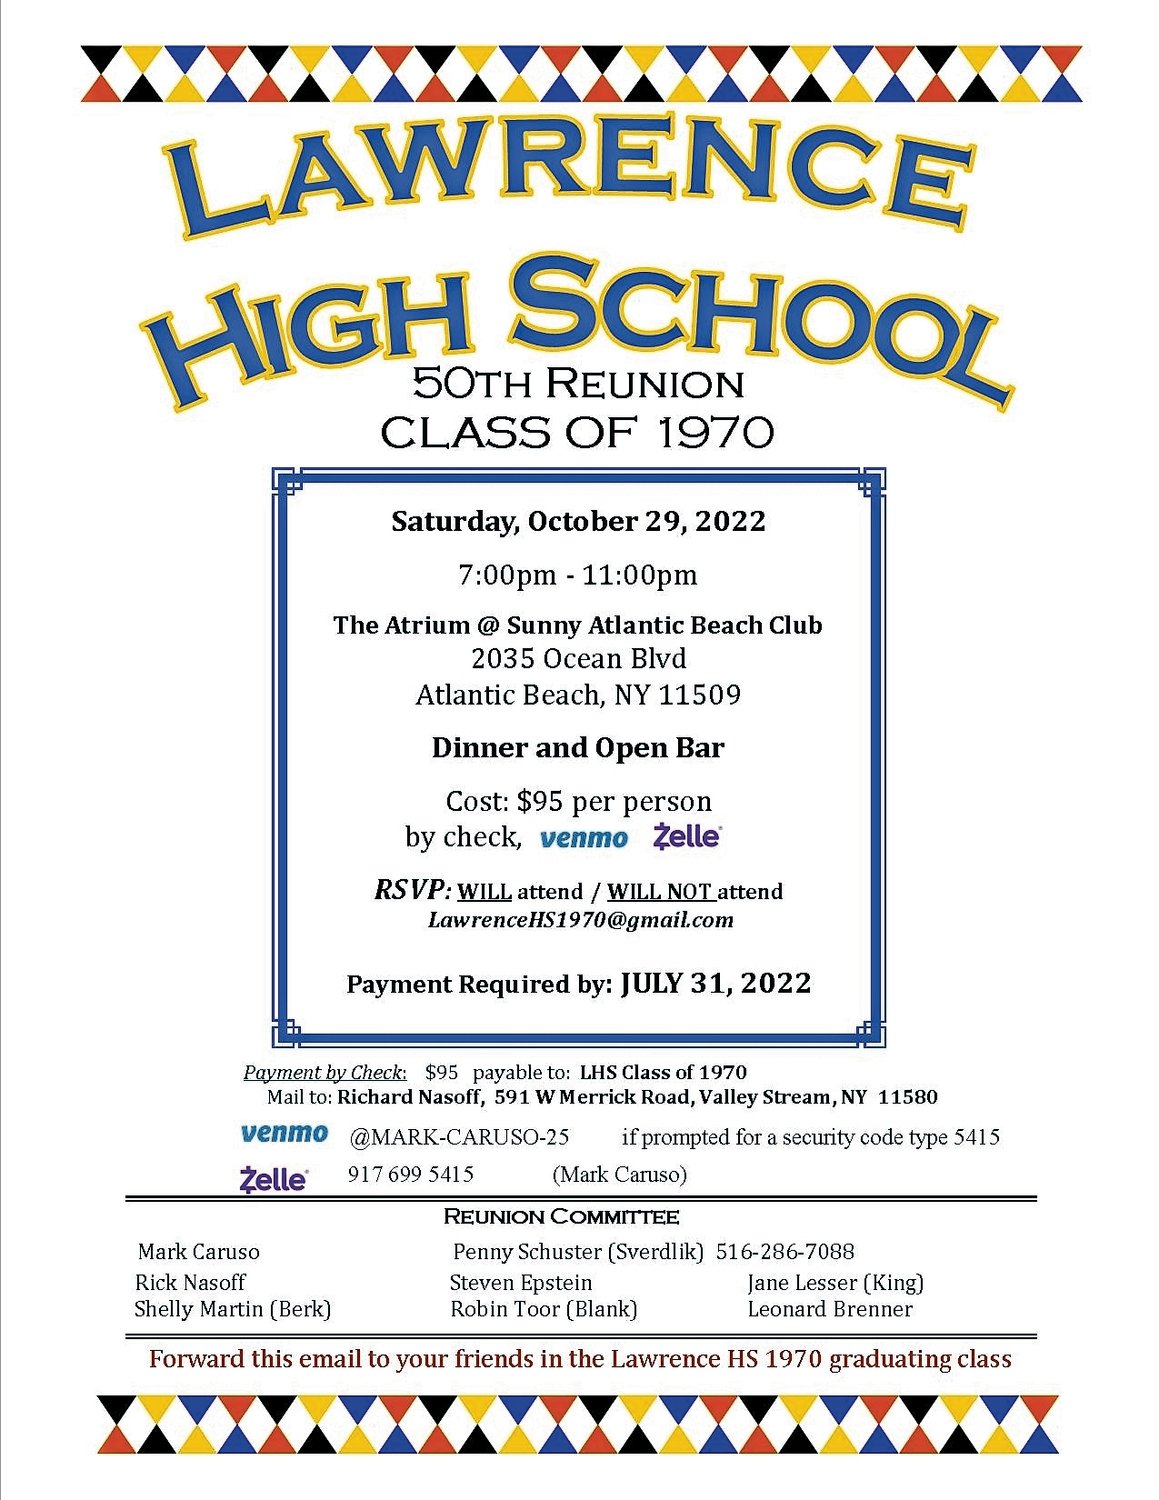 A 50th anniversary reunion for the Lawrence High class of 1970 will be held in the Atrium of Sunny Atlantic Beach Club in Atlantic Beach on Oct. 29.